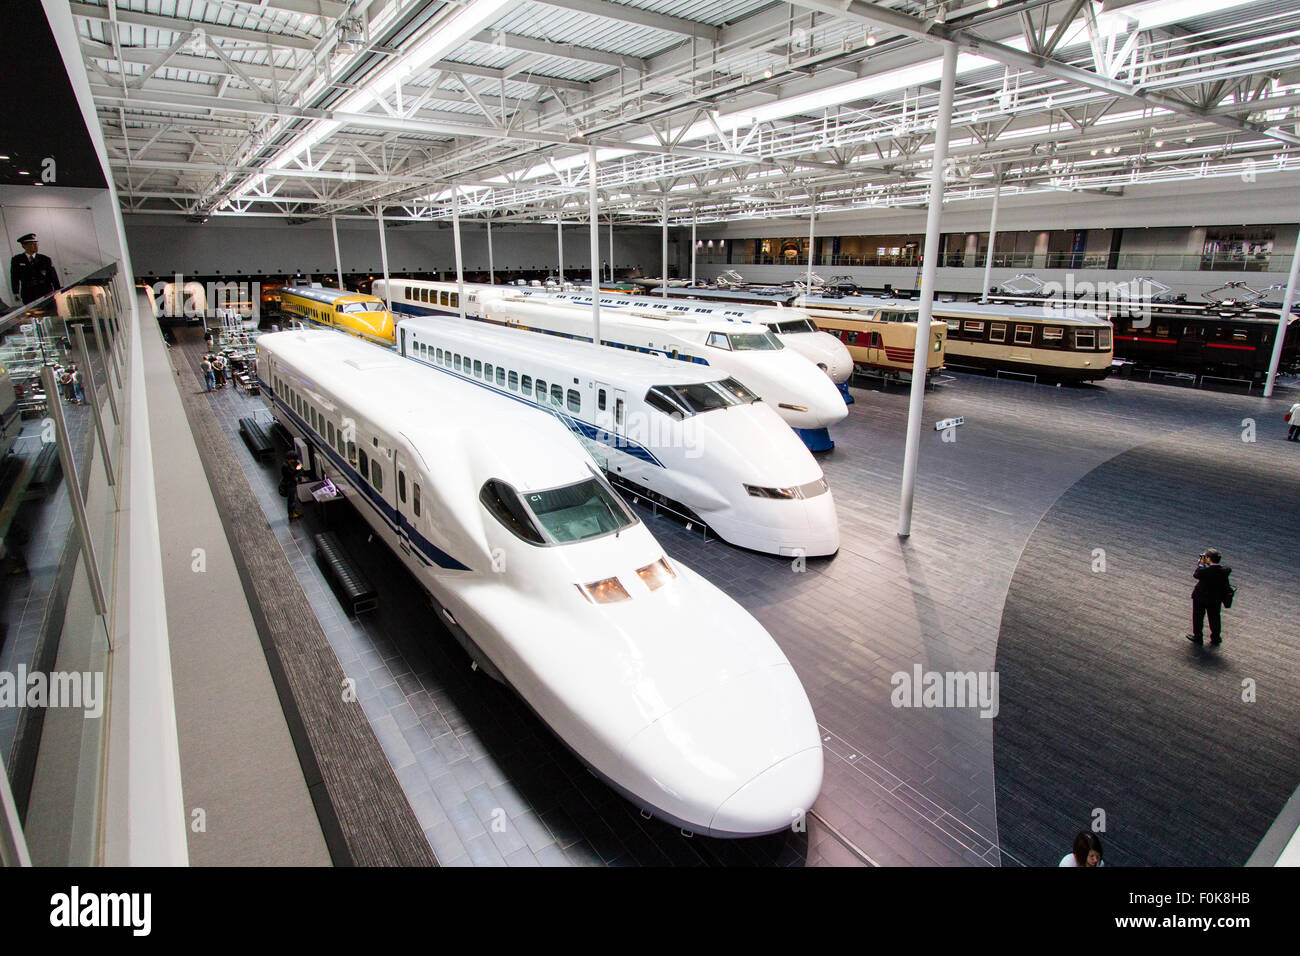 Japan, Nagoya, Railway park. Interior of the Shinkansen Museum. Four bullet trains, 700 series nearest, then 200, 100 and 0 arranged in a line. Stock Photo